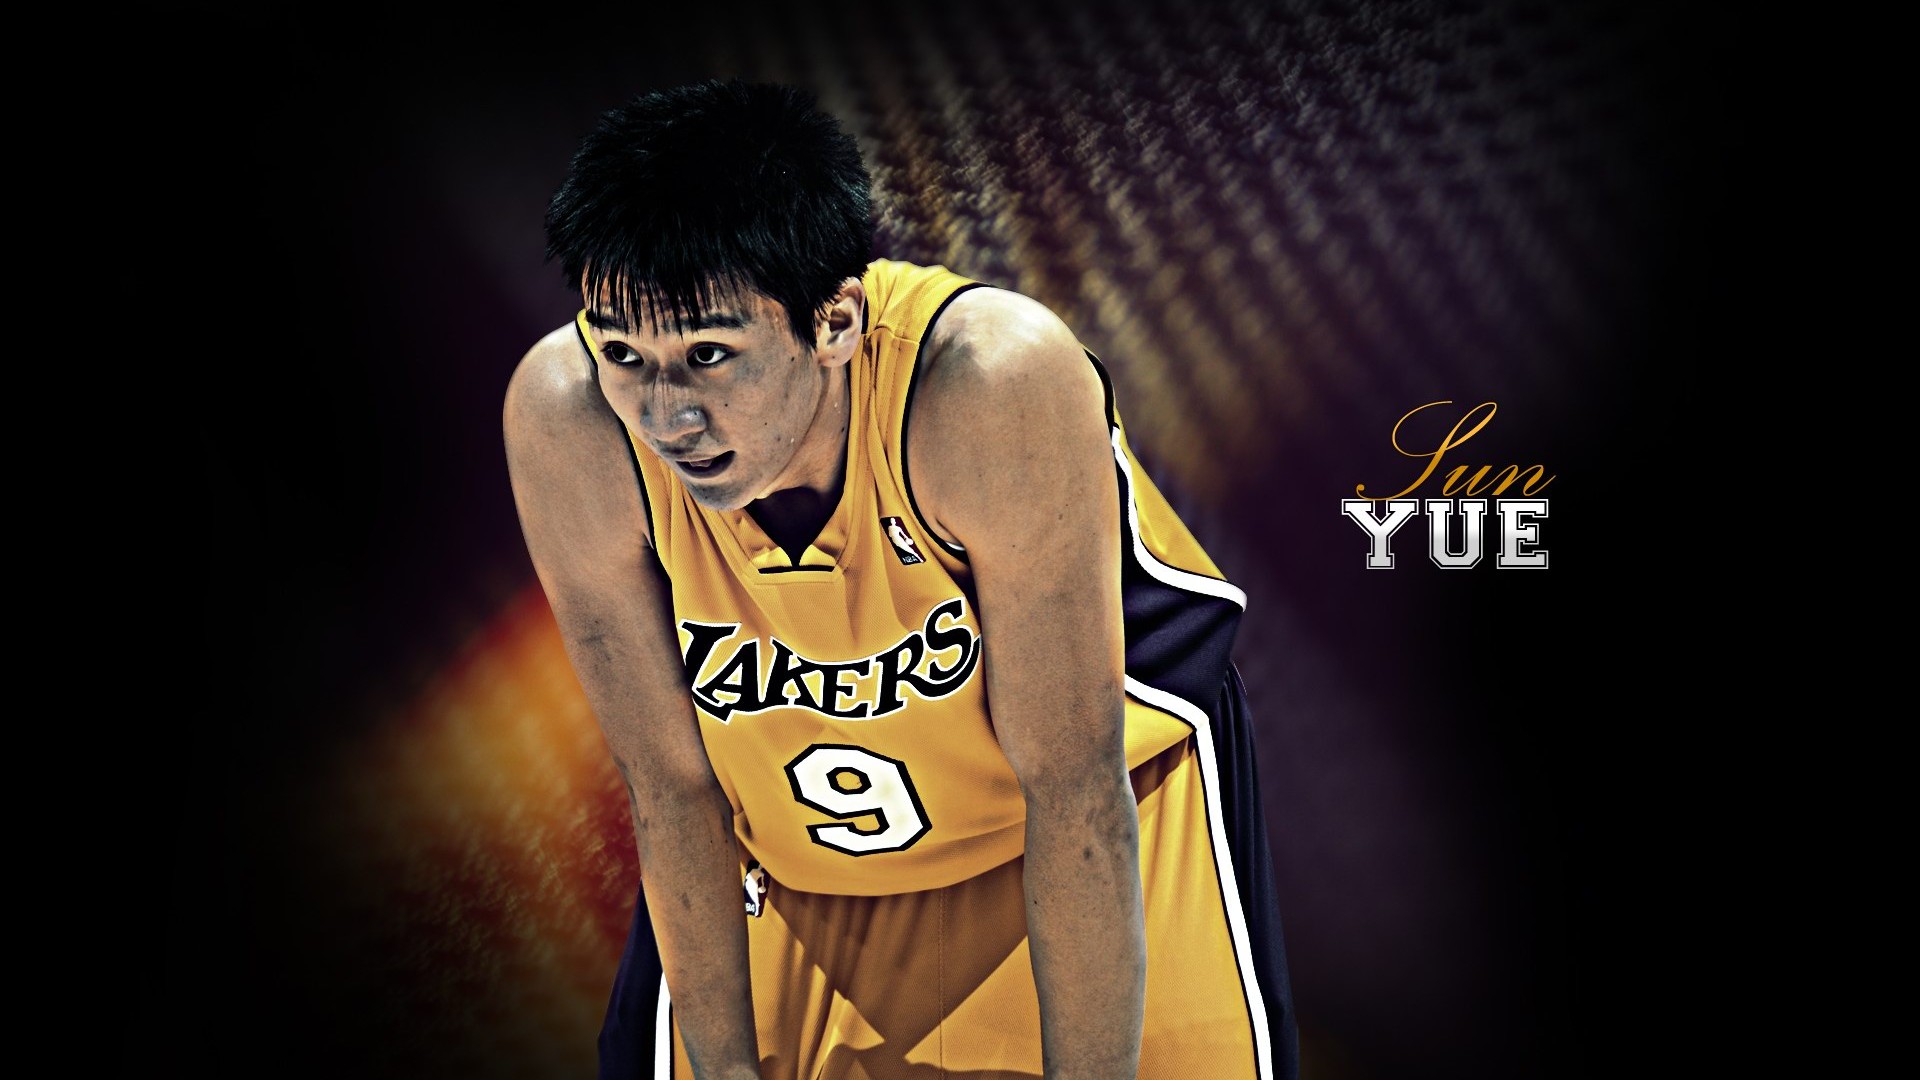 Los Angeles Lakers Wallpaper Oficial #24 - 1920x1080